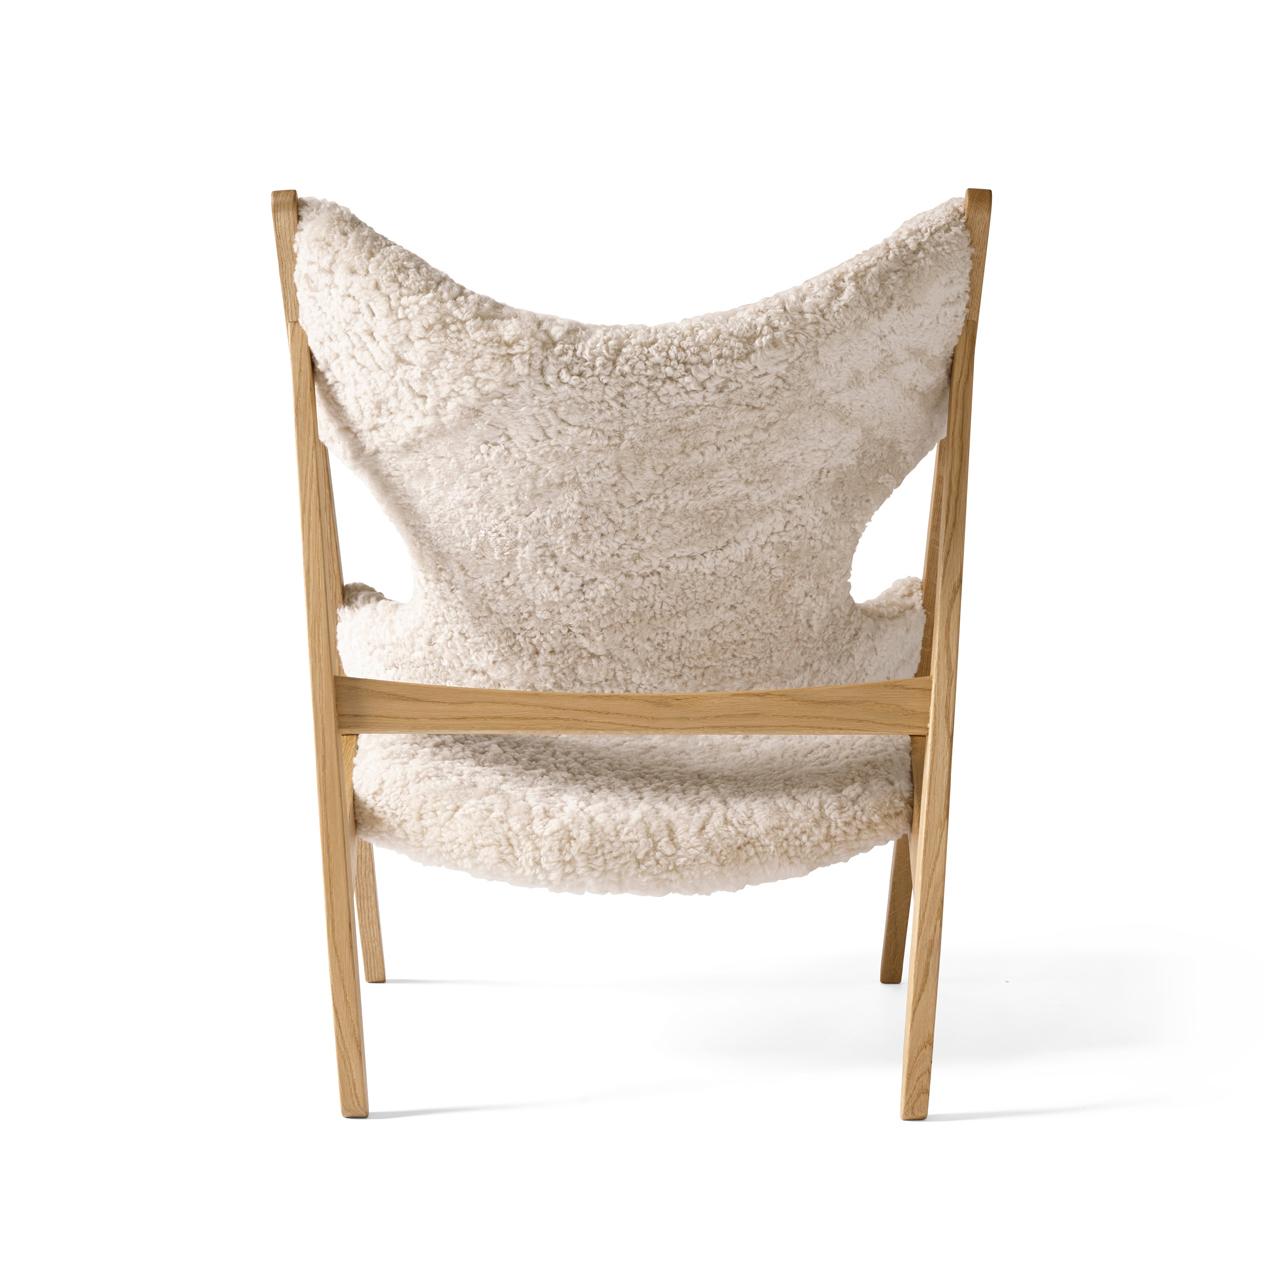 Defined by an exposed, triangular construction, a gently curved seat and back ideally pitched for relaxation, and distinctive cut-outs for resting the elbows when reading (or, of course, knitting), the Knitting chair affirmed Kofod-Larsen’s